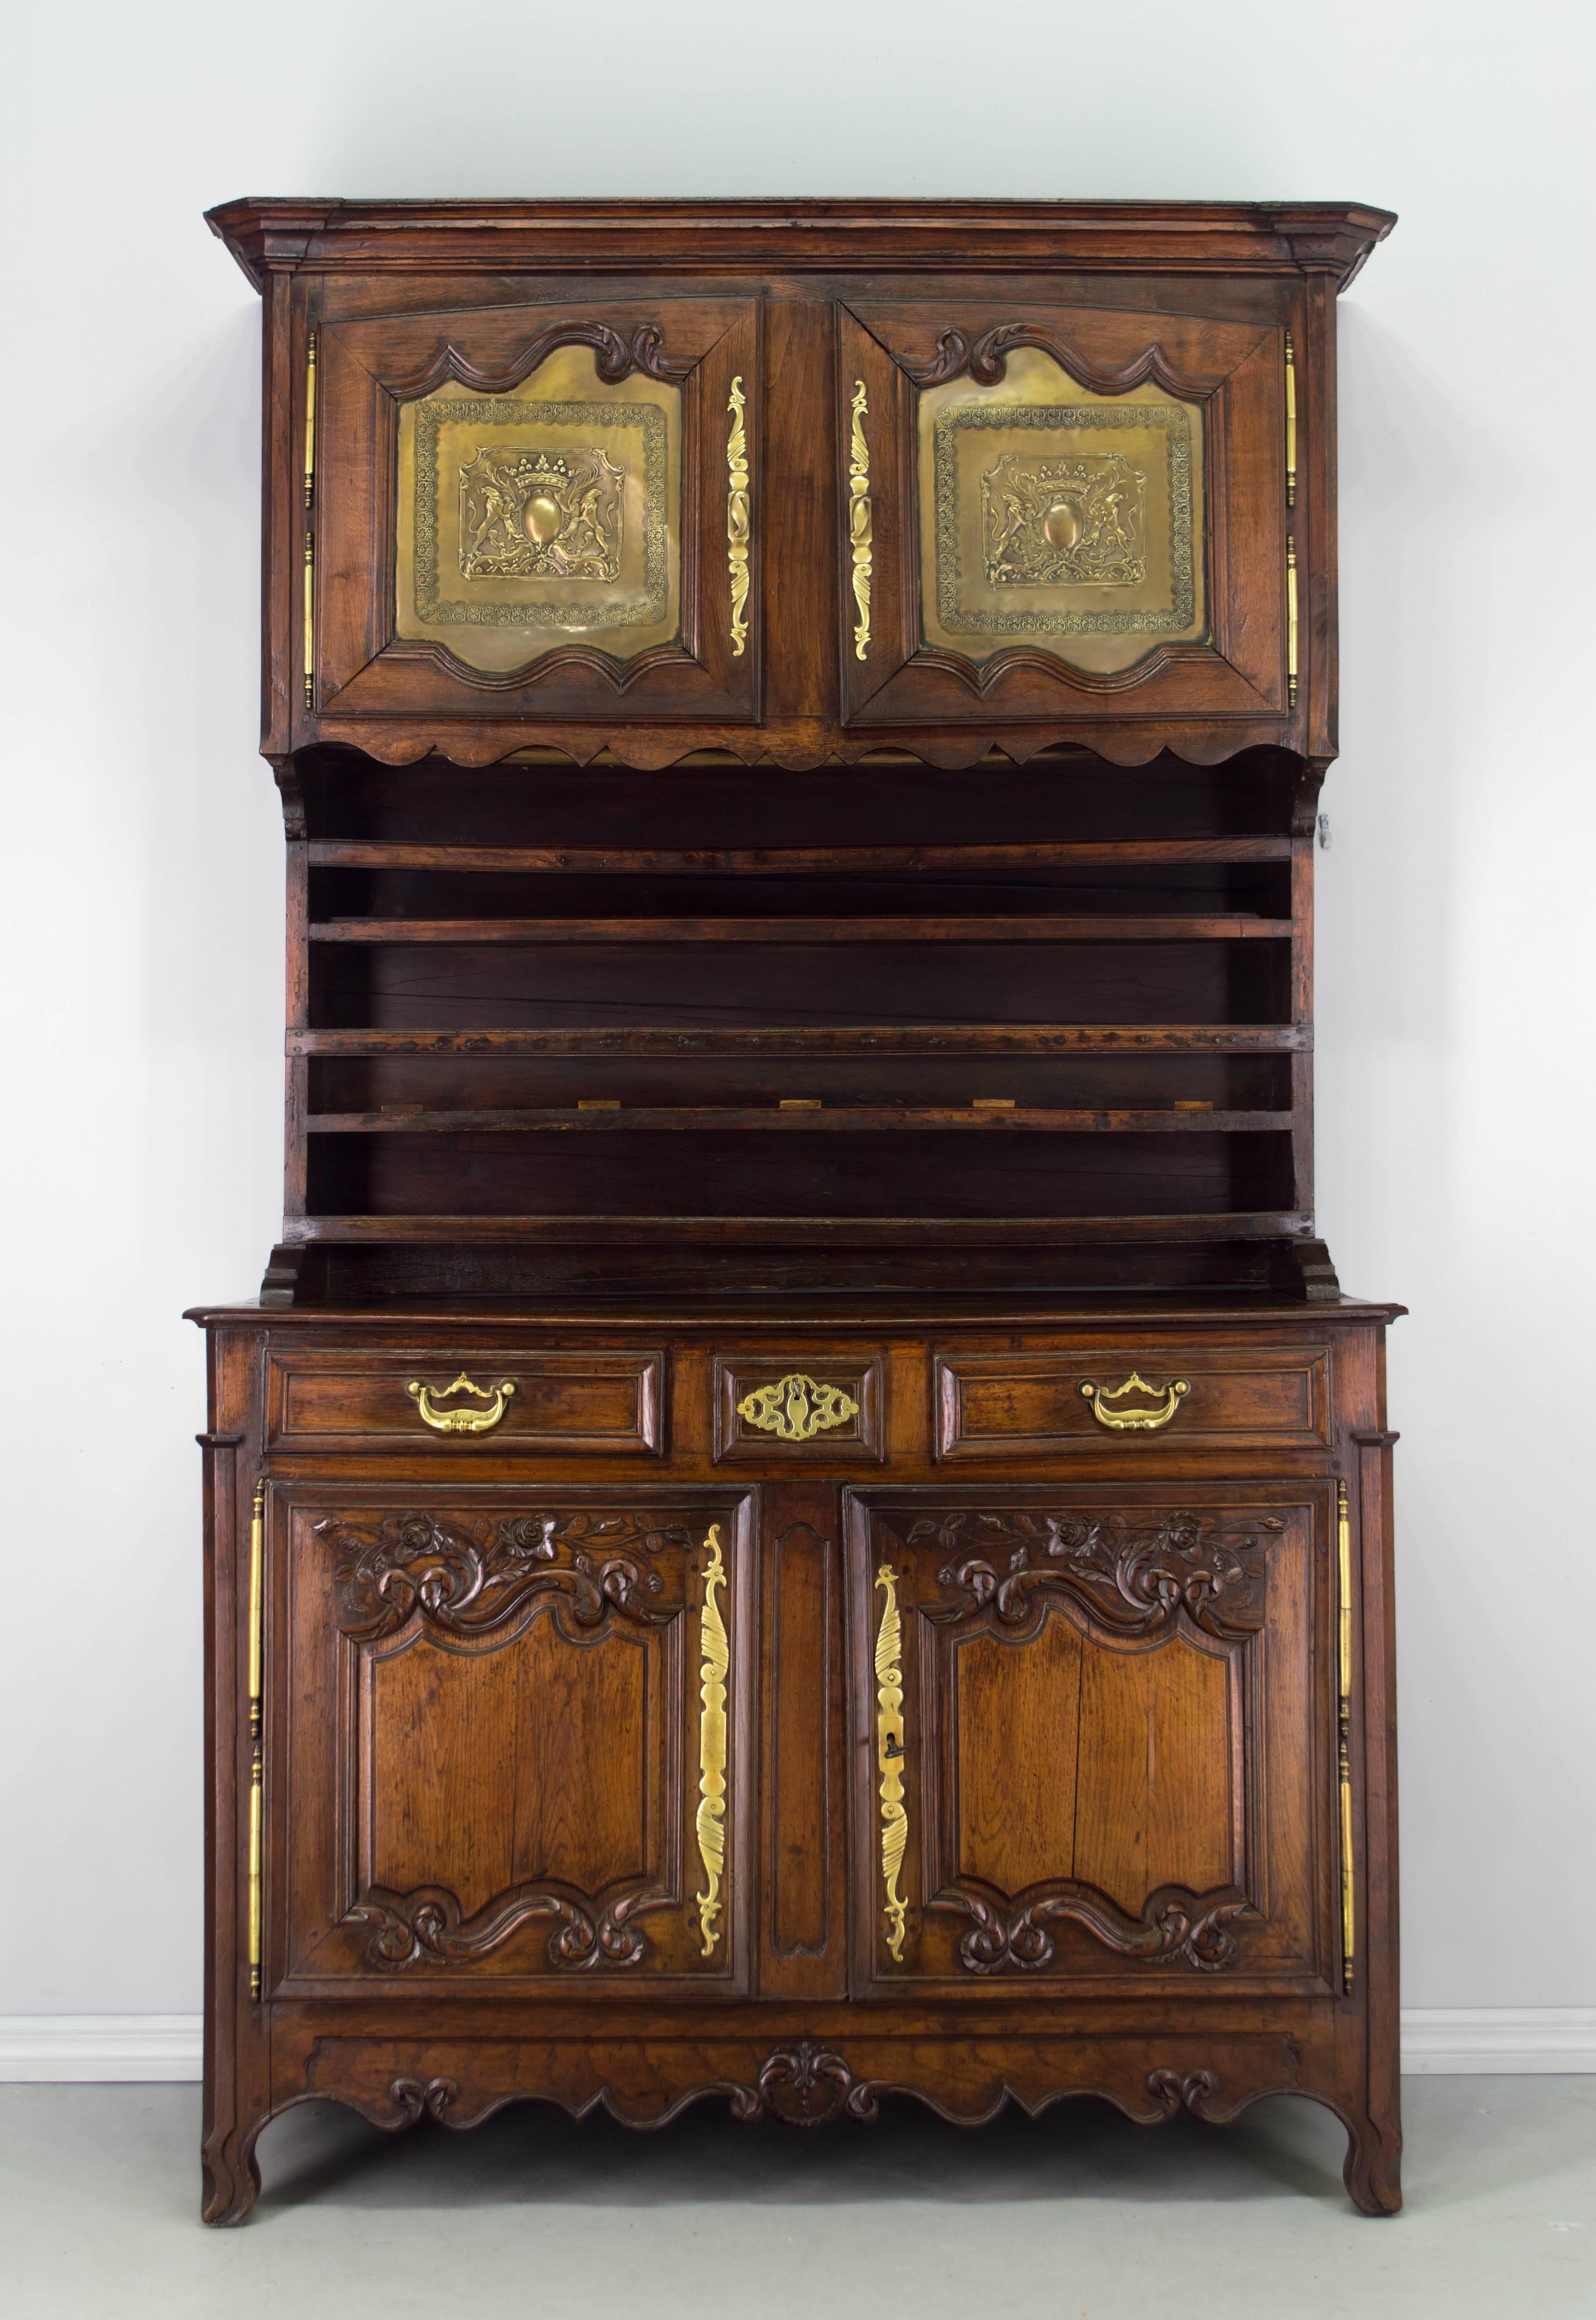 A vaisselier from the Manche province (north of Normandy) made of solid chestnut. Buffet has two beautiful hand-carved doors and three dovetailed drawers. Upper cabinet has two doors with brass panels embossed with the coat of arms of the local